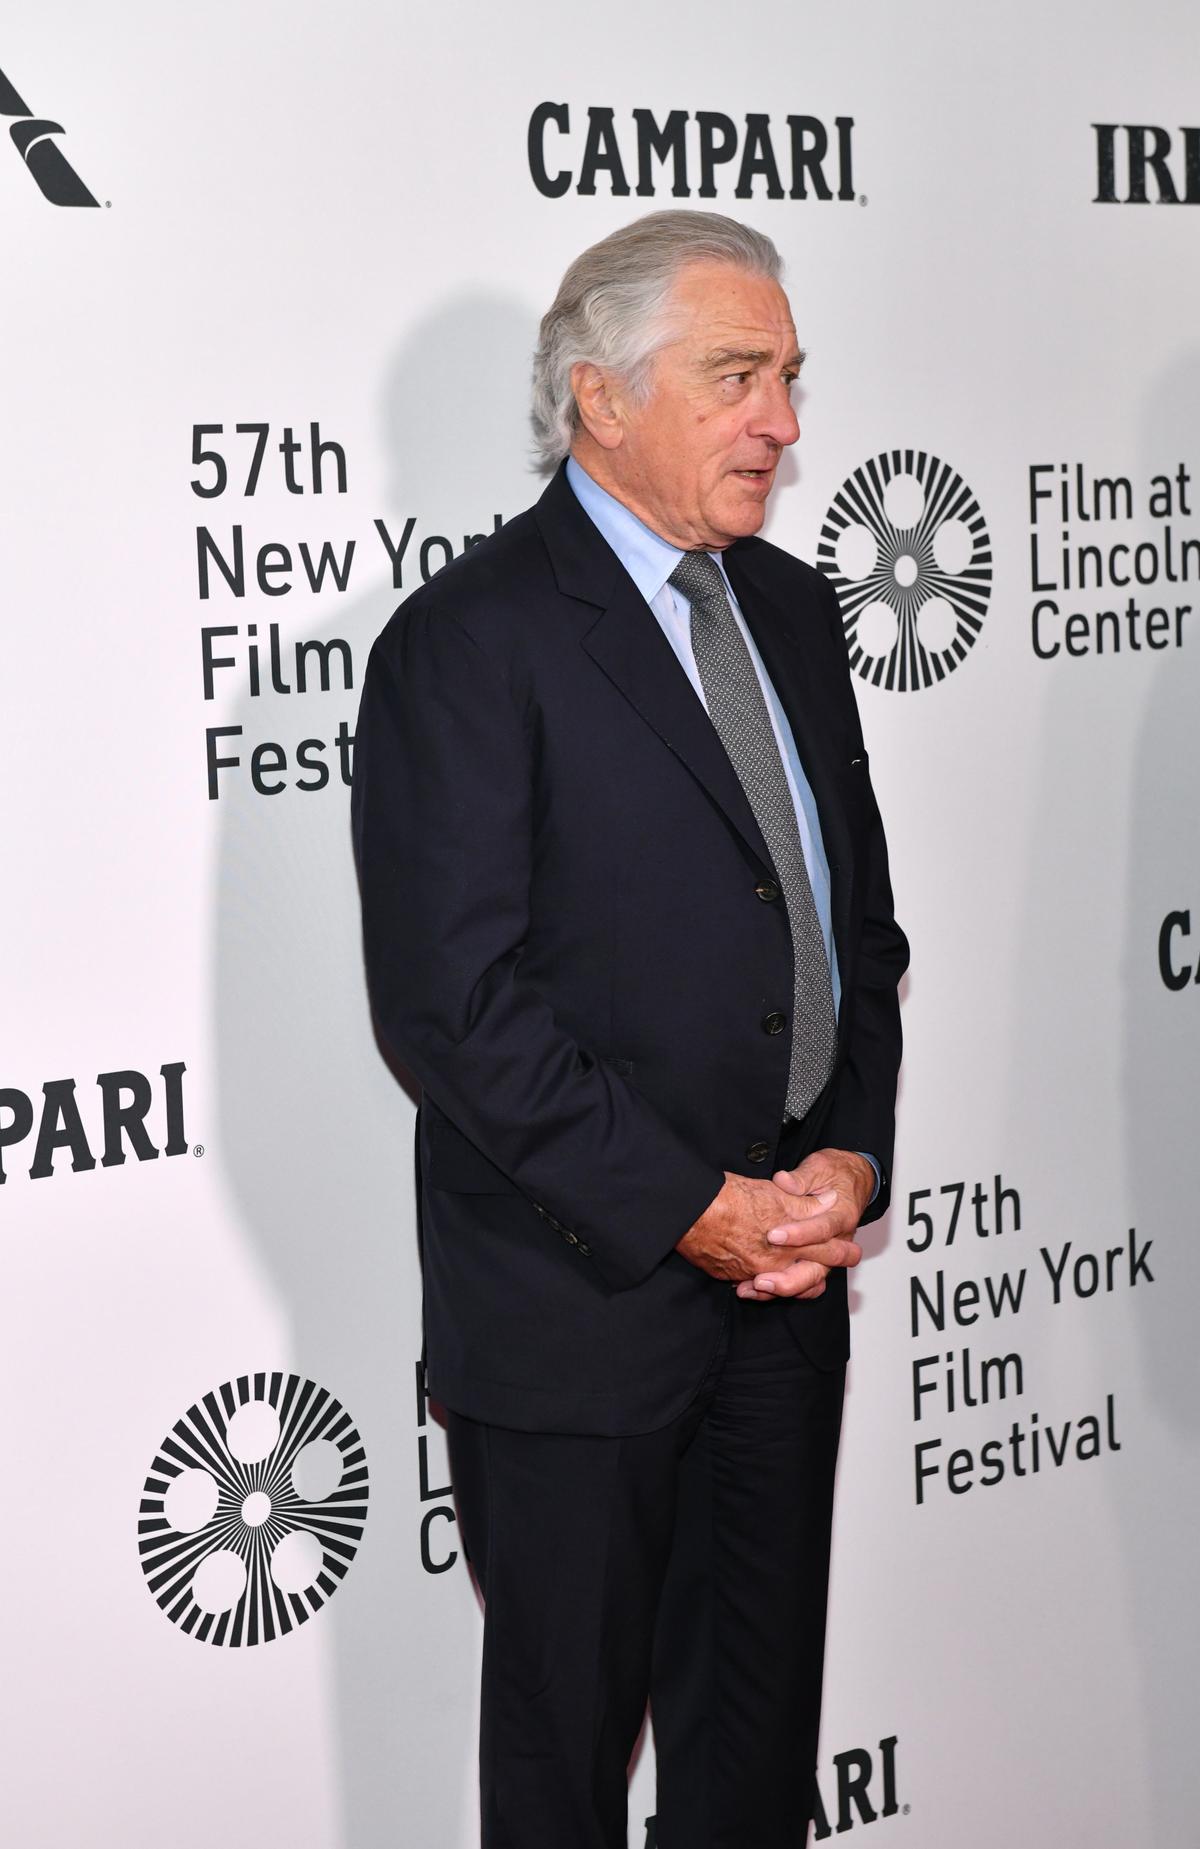 Robert De Niro attends as Campari sponsors Opening Night of the 57th New York Film Festival in New York City on Sept. 27, 2019. (Photo by Craig Barritt/Getty Images for Campari)